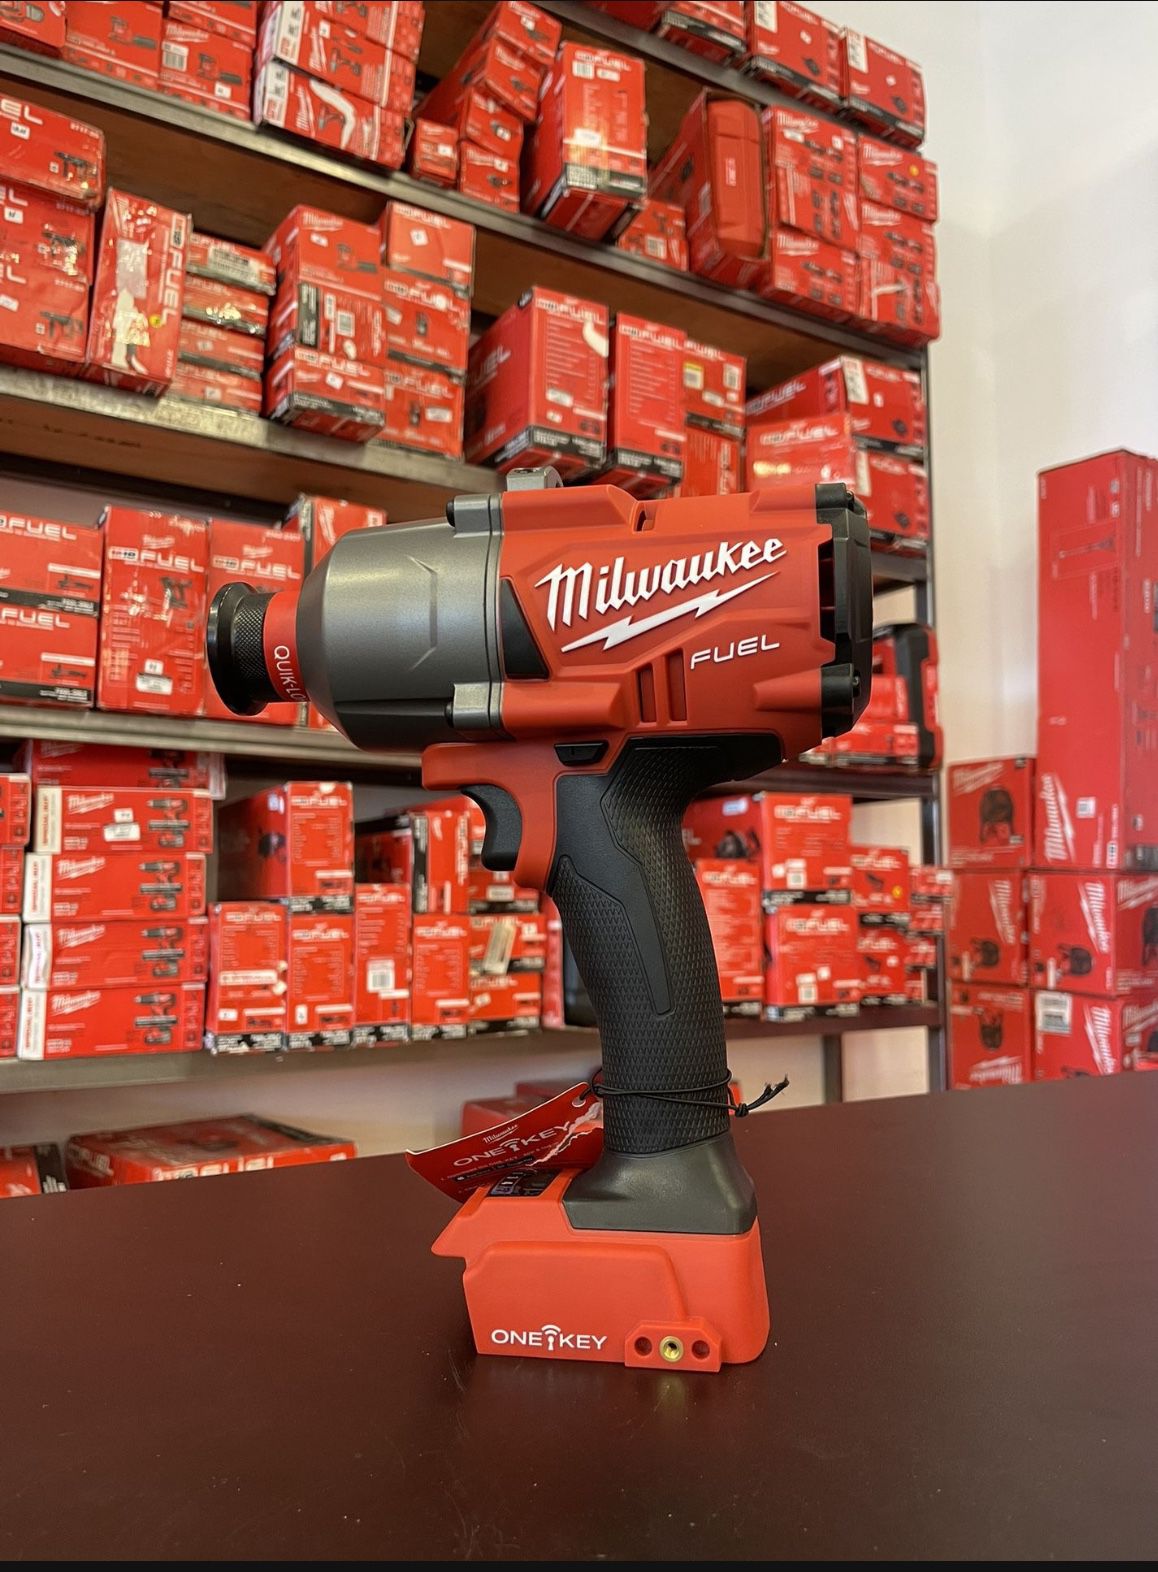 Milwaukee M18 Fuel 7/16” Hex Utility High Torque Impact Wrench W/one-key…… 2865-20 for Sale in Las Vegas, NV OfferUp